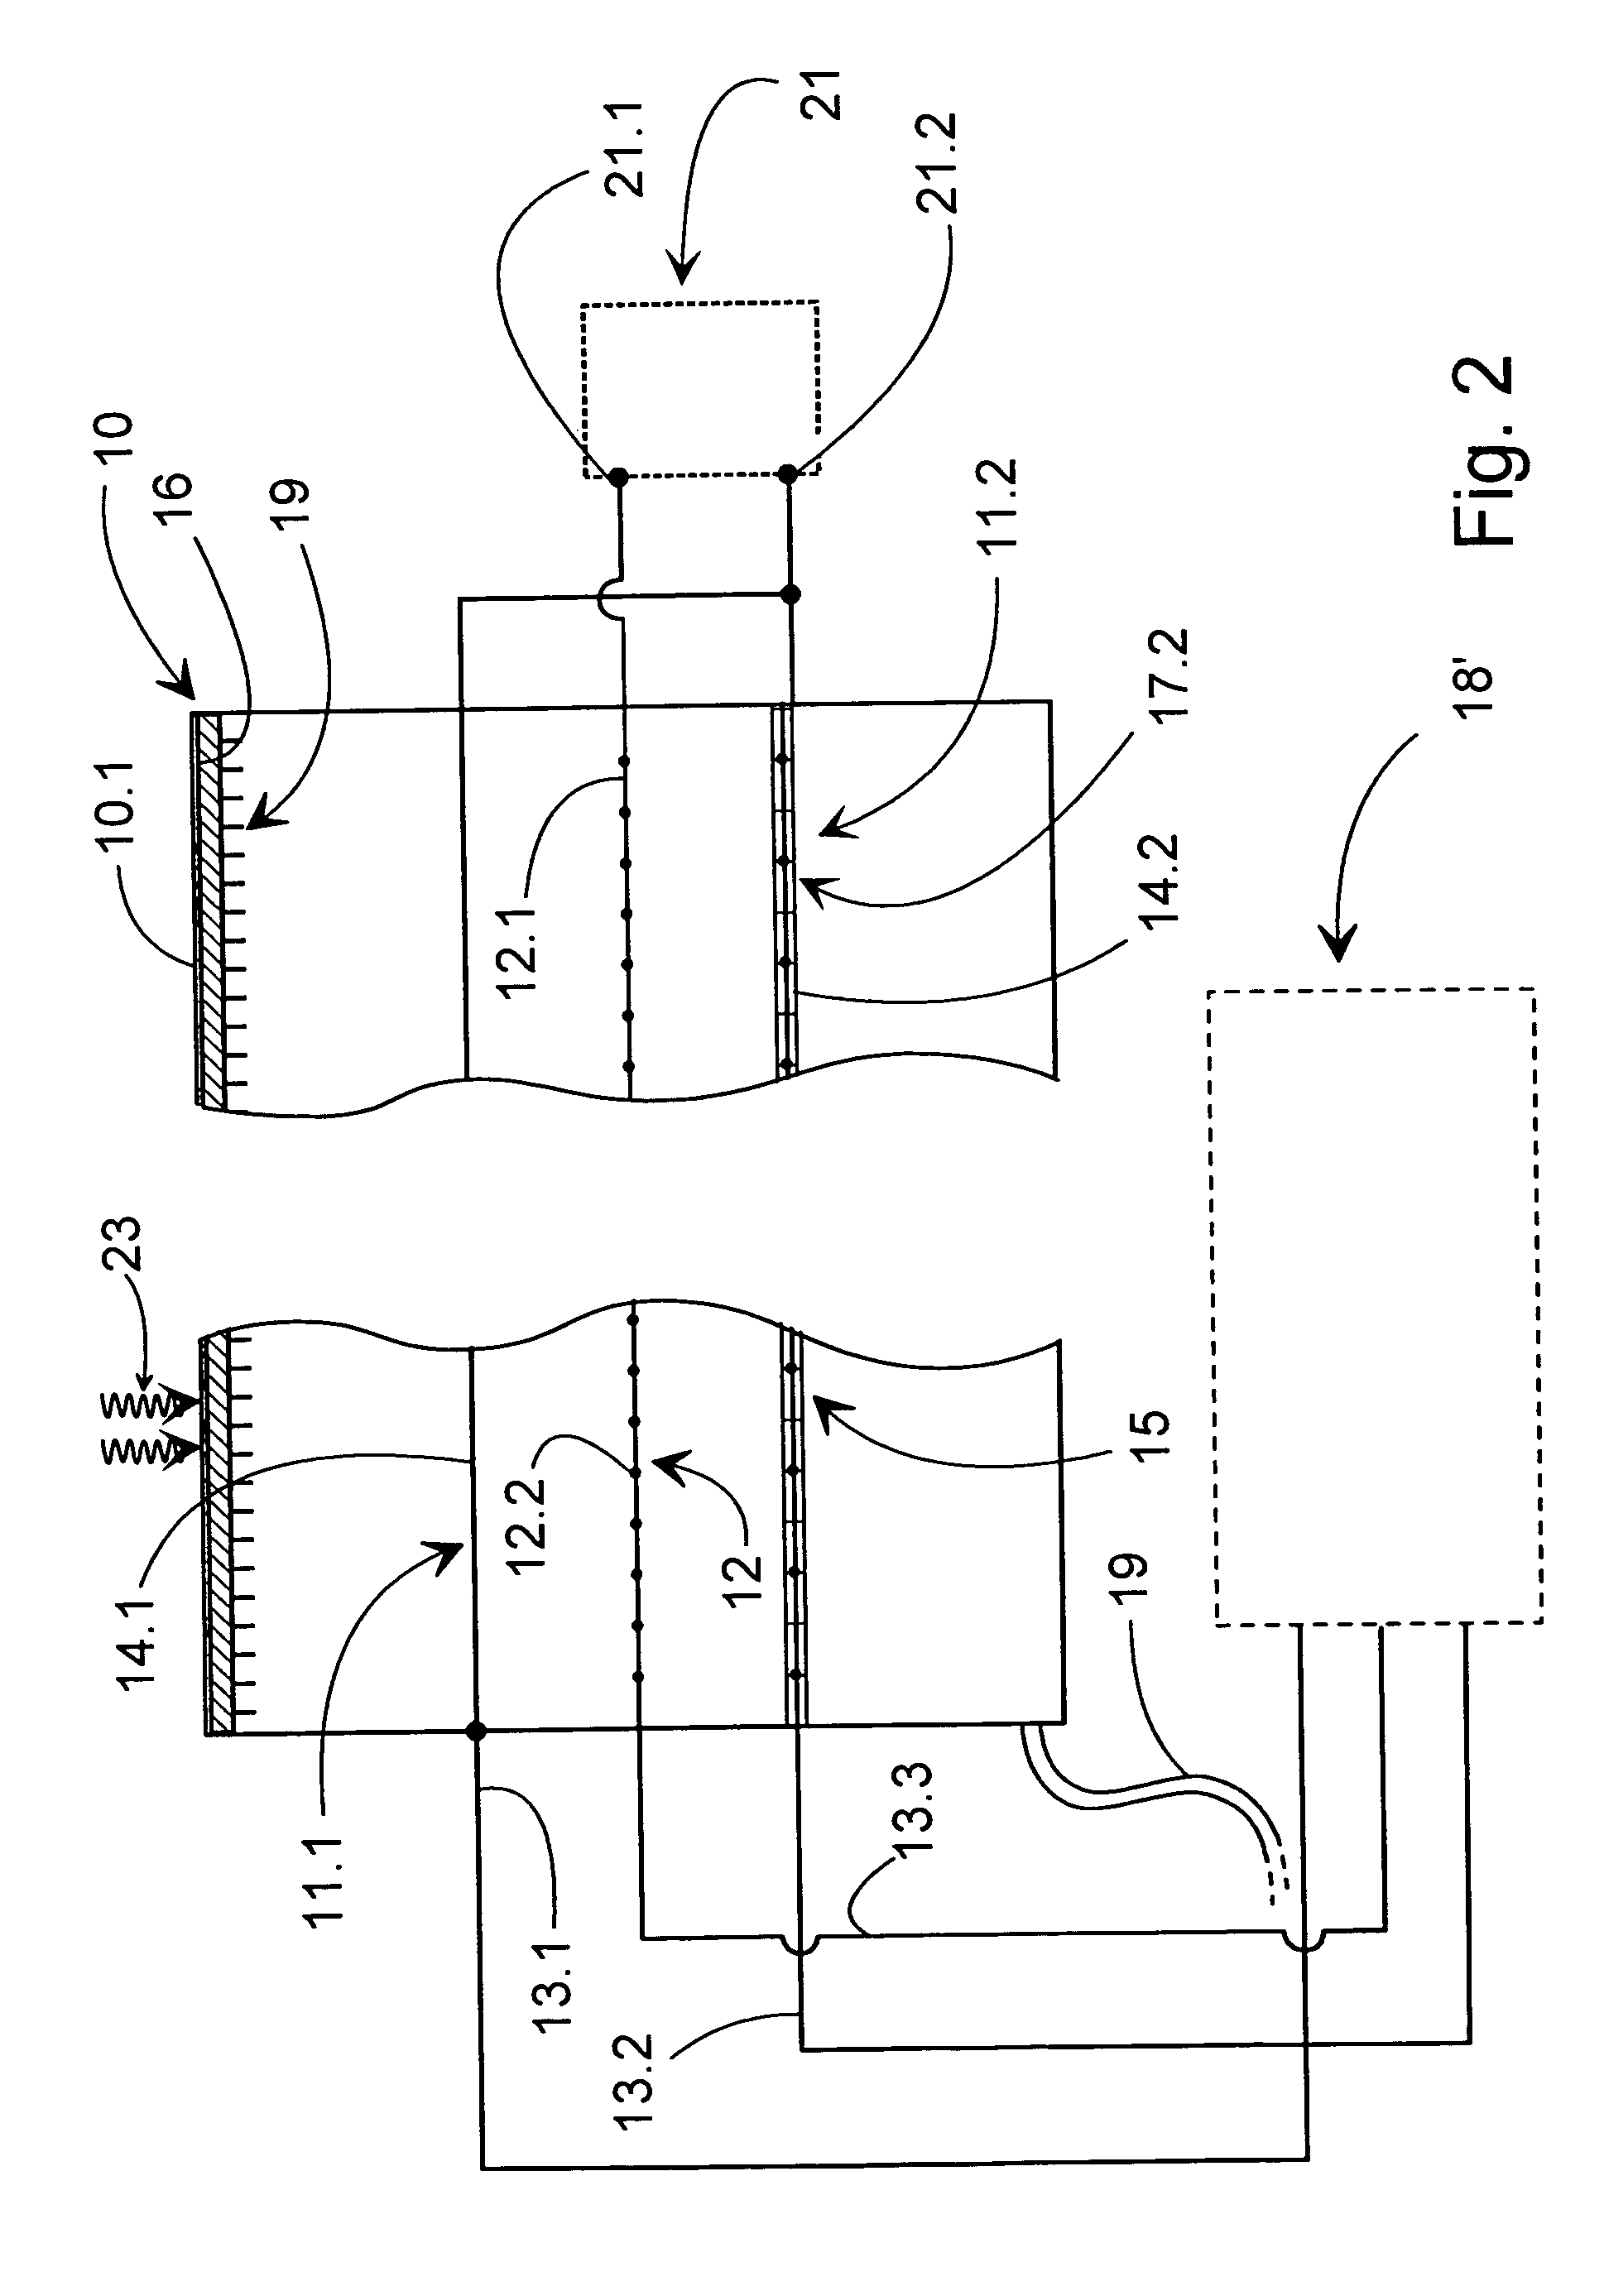 Method and apparatus for determining the intensity distribution of a radiation field